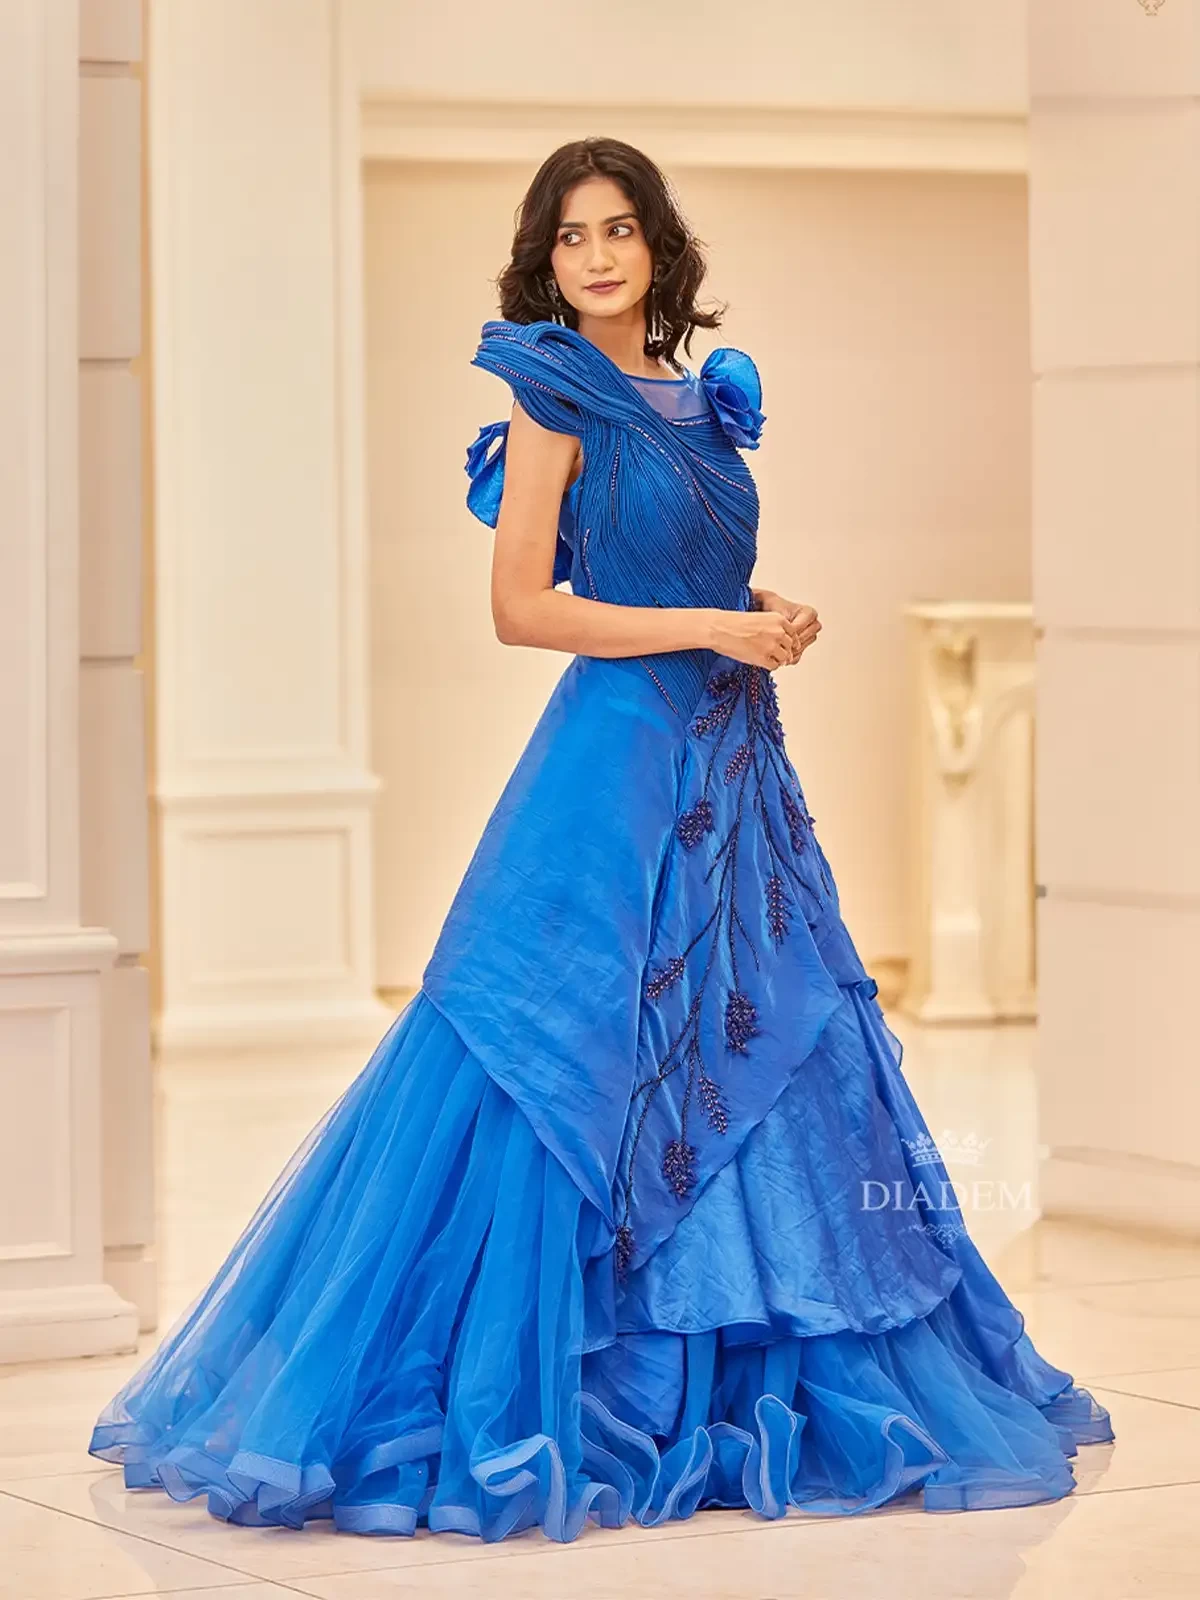 Sapphire Blue Gown Adorned With Floral Crystals And Beads